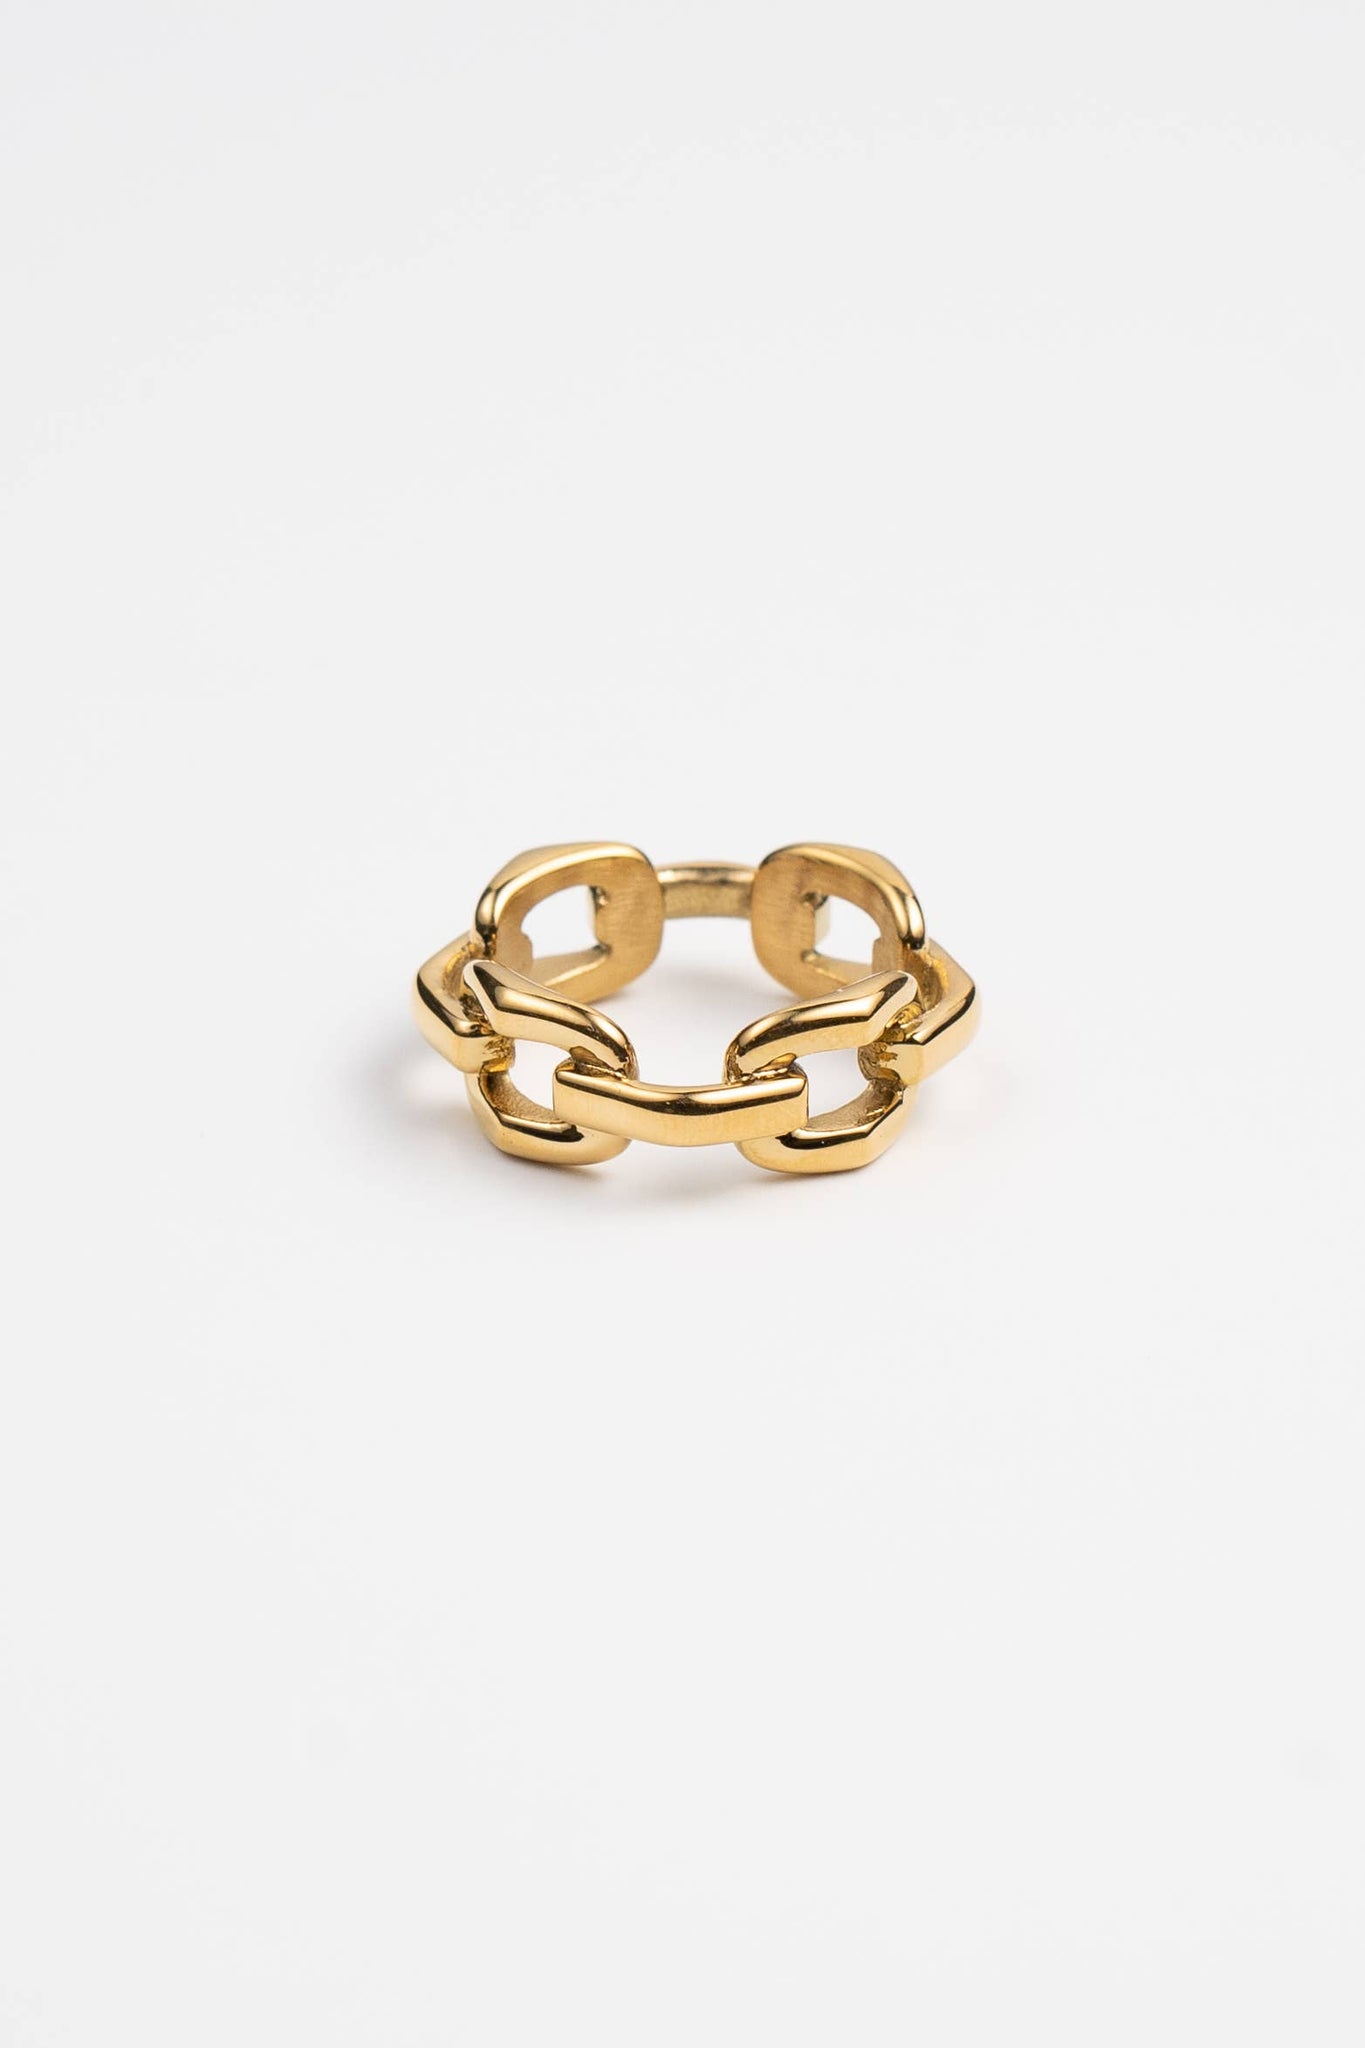 PRODUCT DETAILS Water Resistant 💧METAL: 18K gold over stainless steel. Hypoallergenic DESIGNER NOTE: This bold, modern ring is the perfect addition to any outfit. Designed like a chain, it will forever be a classic. STYLE TIP: Stack this ring with your faves!